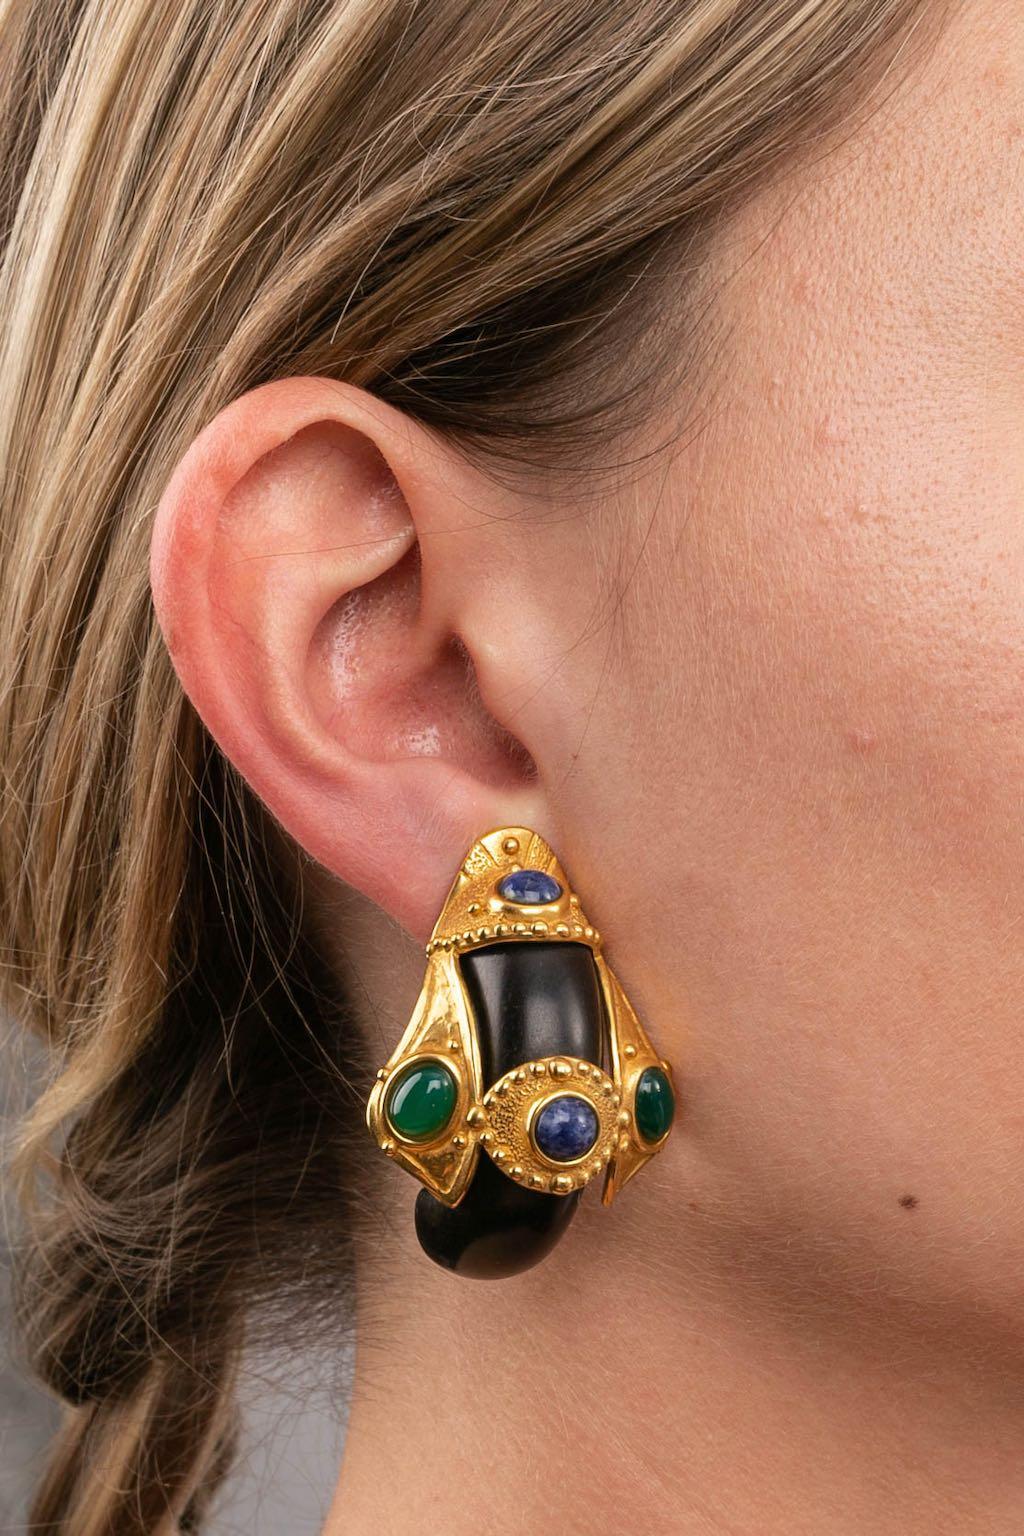 Women's Gilted Metal Clip-on Earrings with Wood, Adorned with Green, Blue Cabochons For Sale